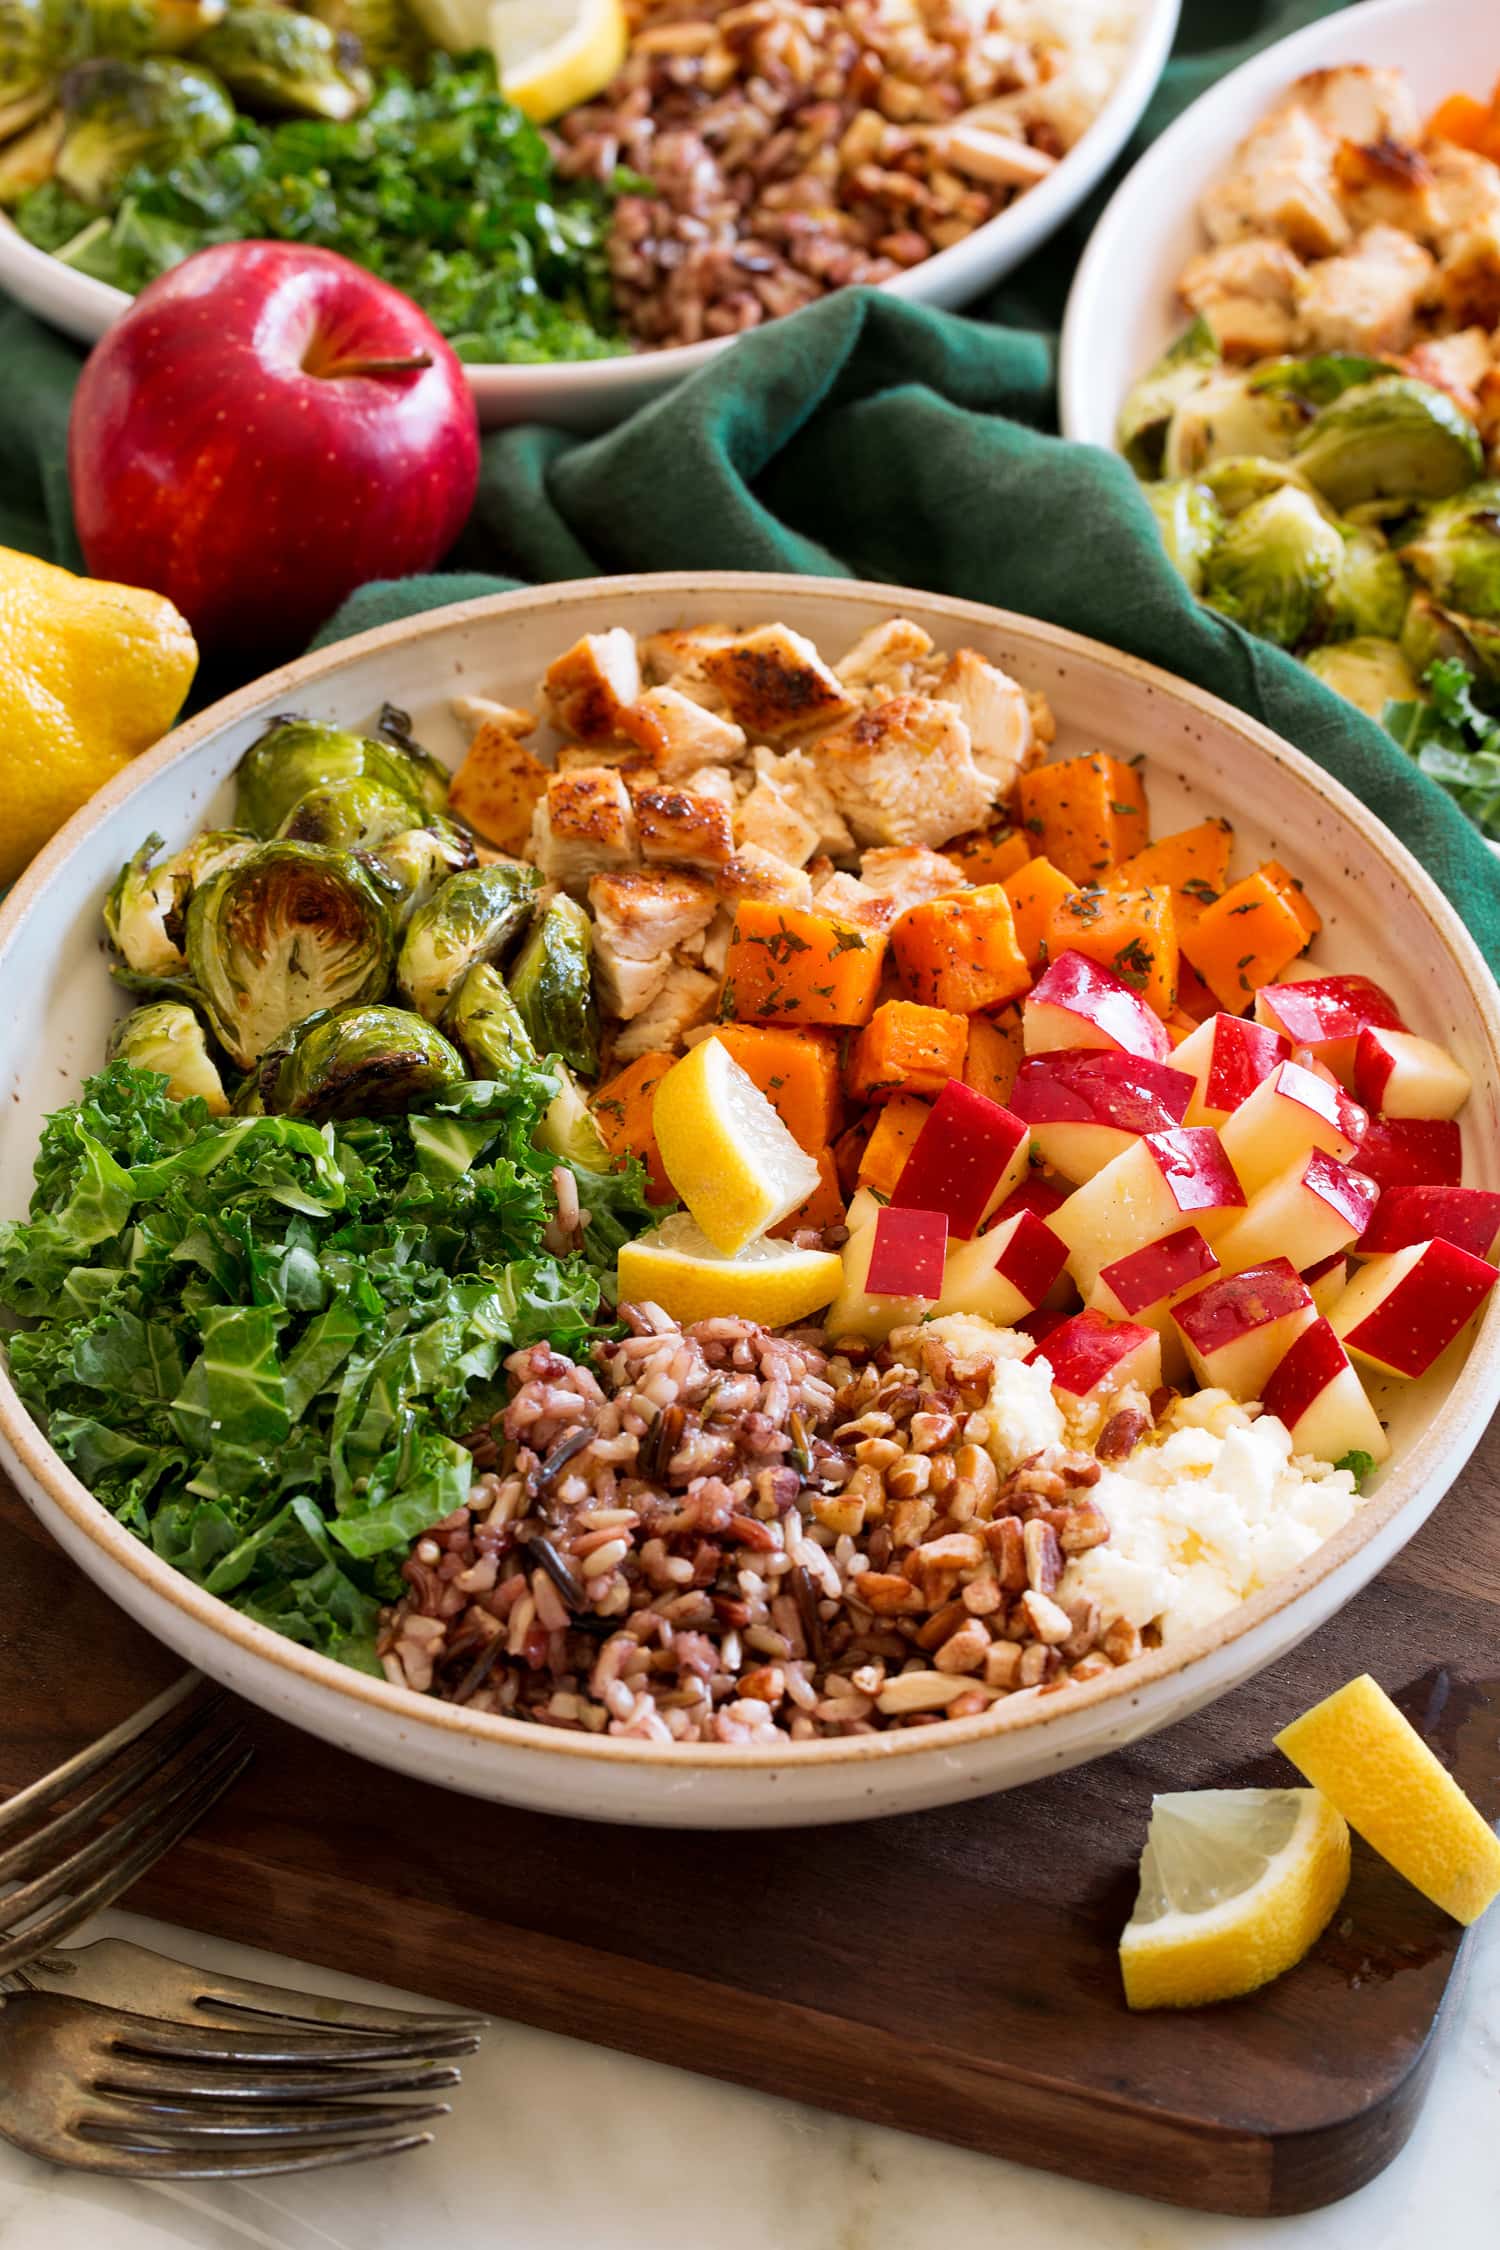 Sweet green harvest bowl copycat single serving with sweet potatoes, kale, apples, chicken, wild rice, goat cheese, and lemon dressing.